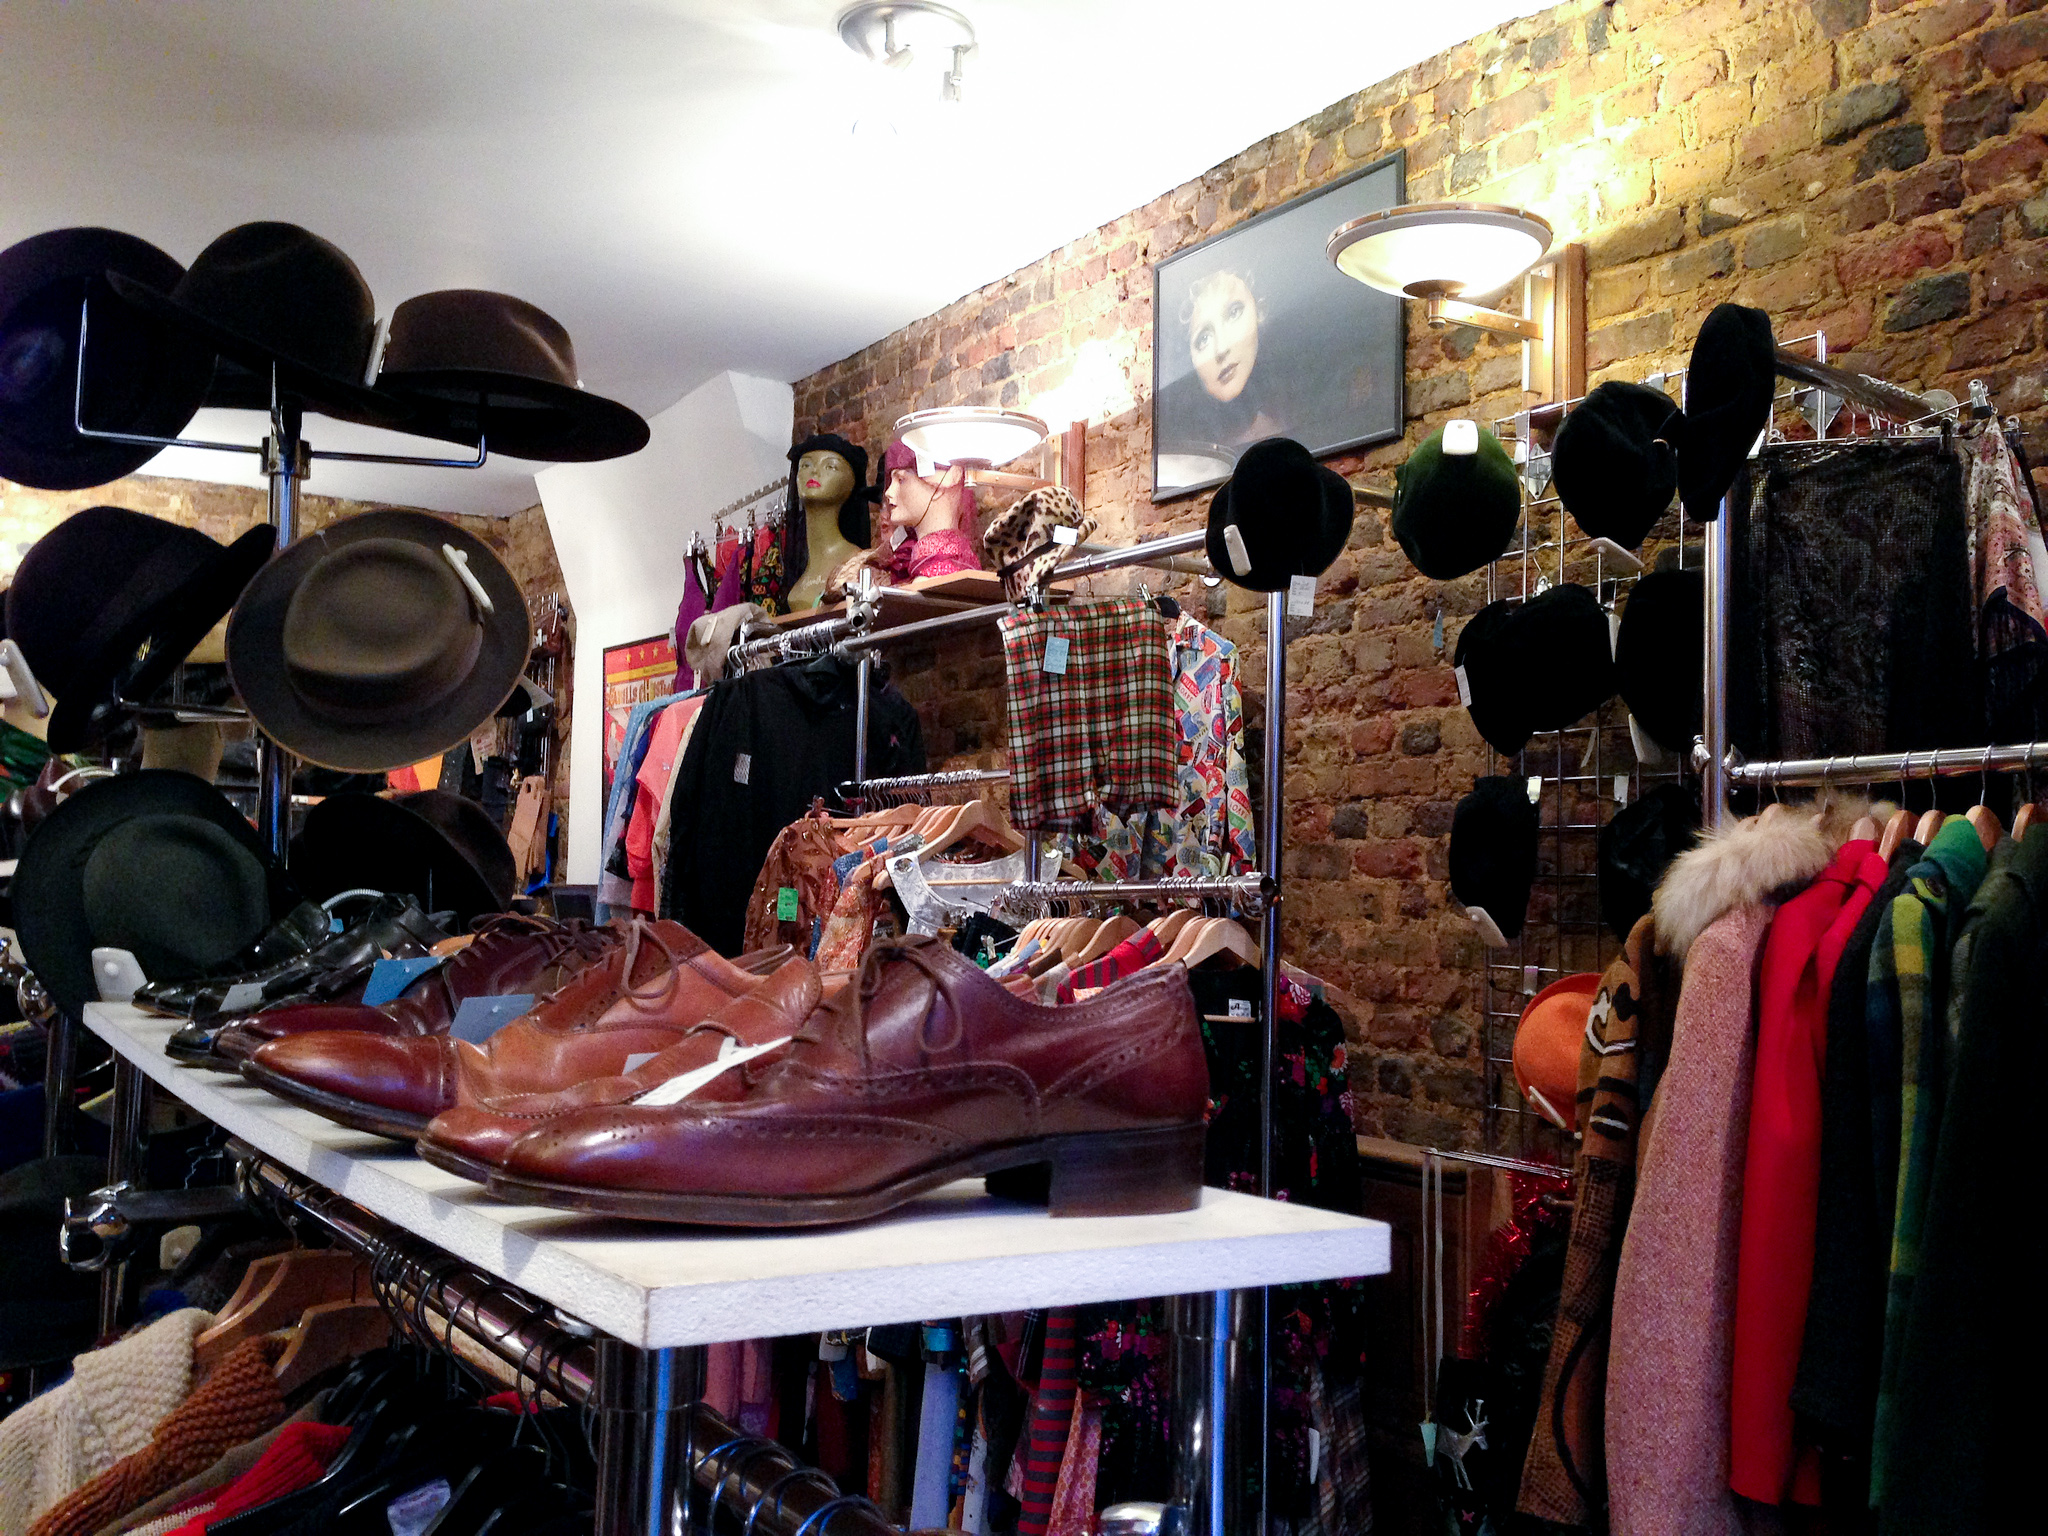 Men's vintage inside Hunky Dory Vintage in London. Photo by alphacityguides.